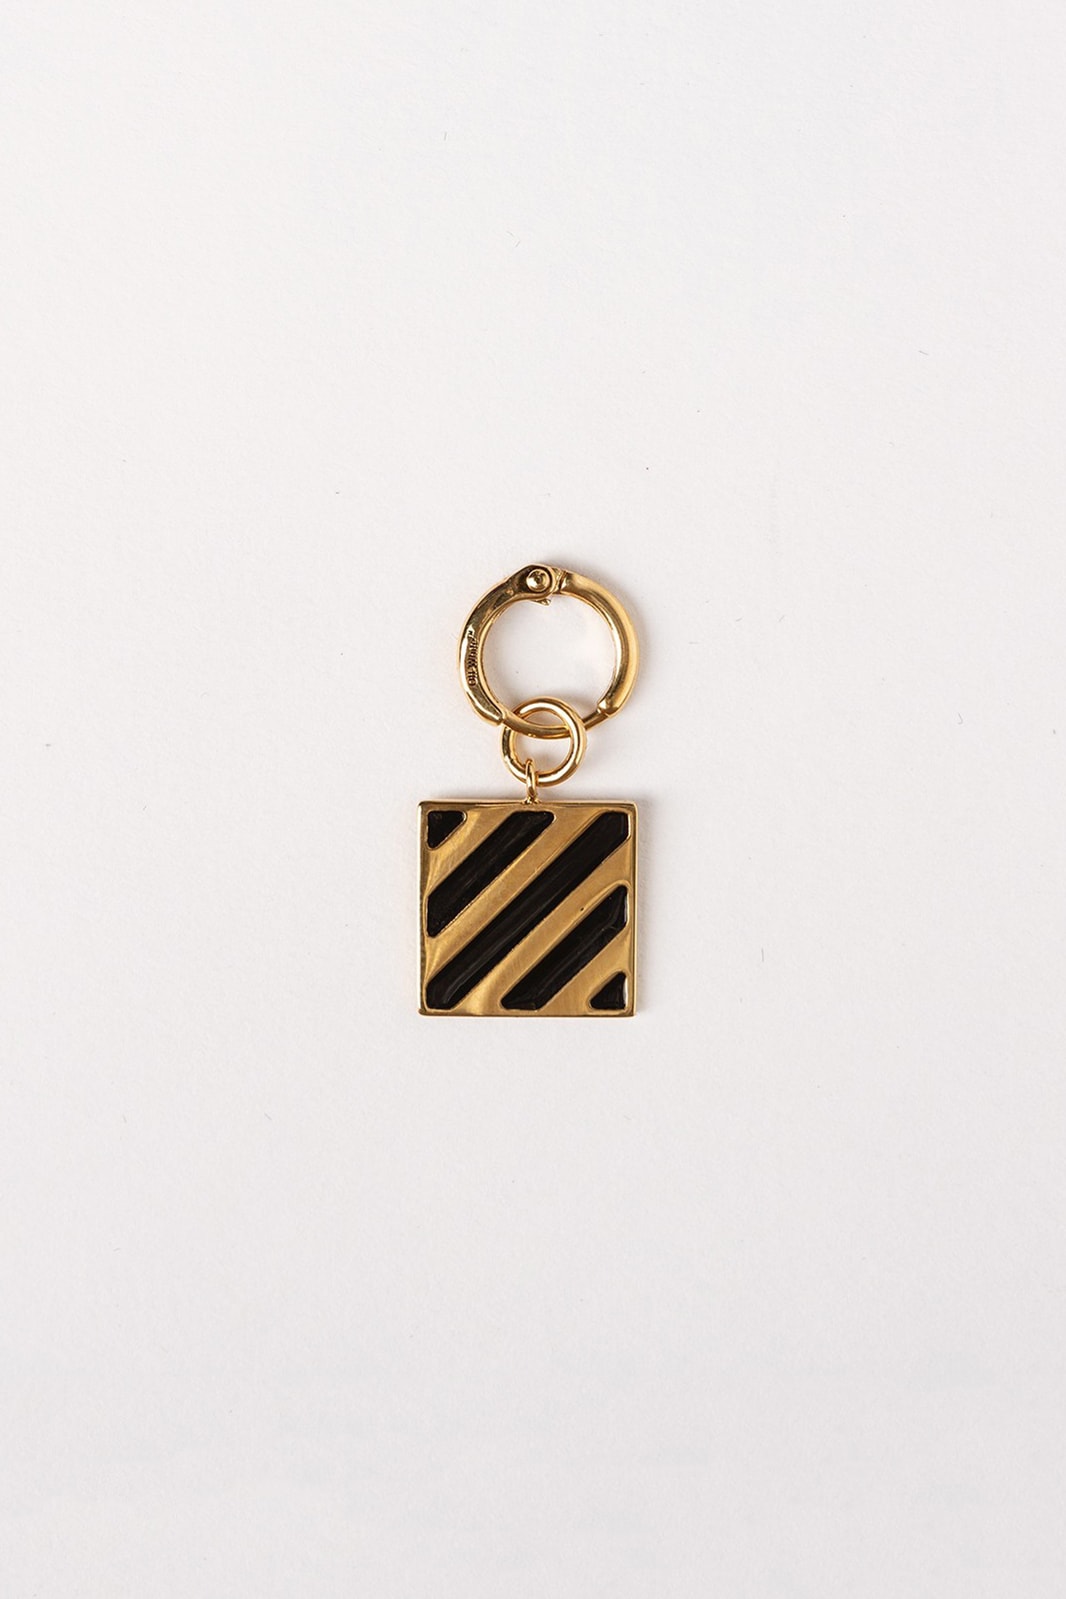 Off White Jewelry Collection Keychain Gold Black